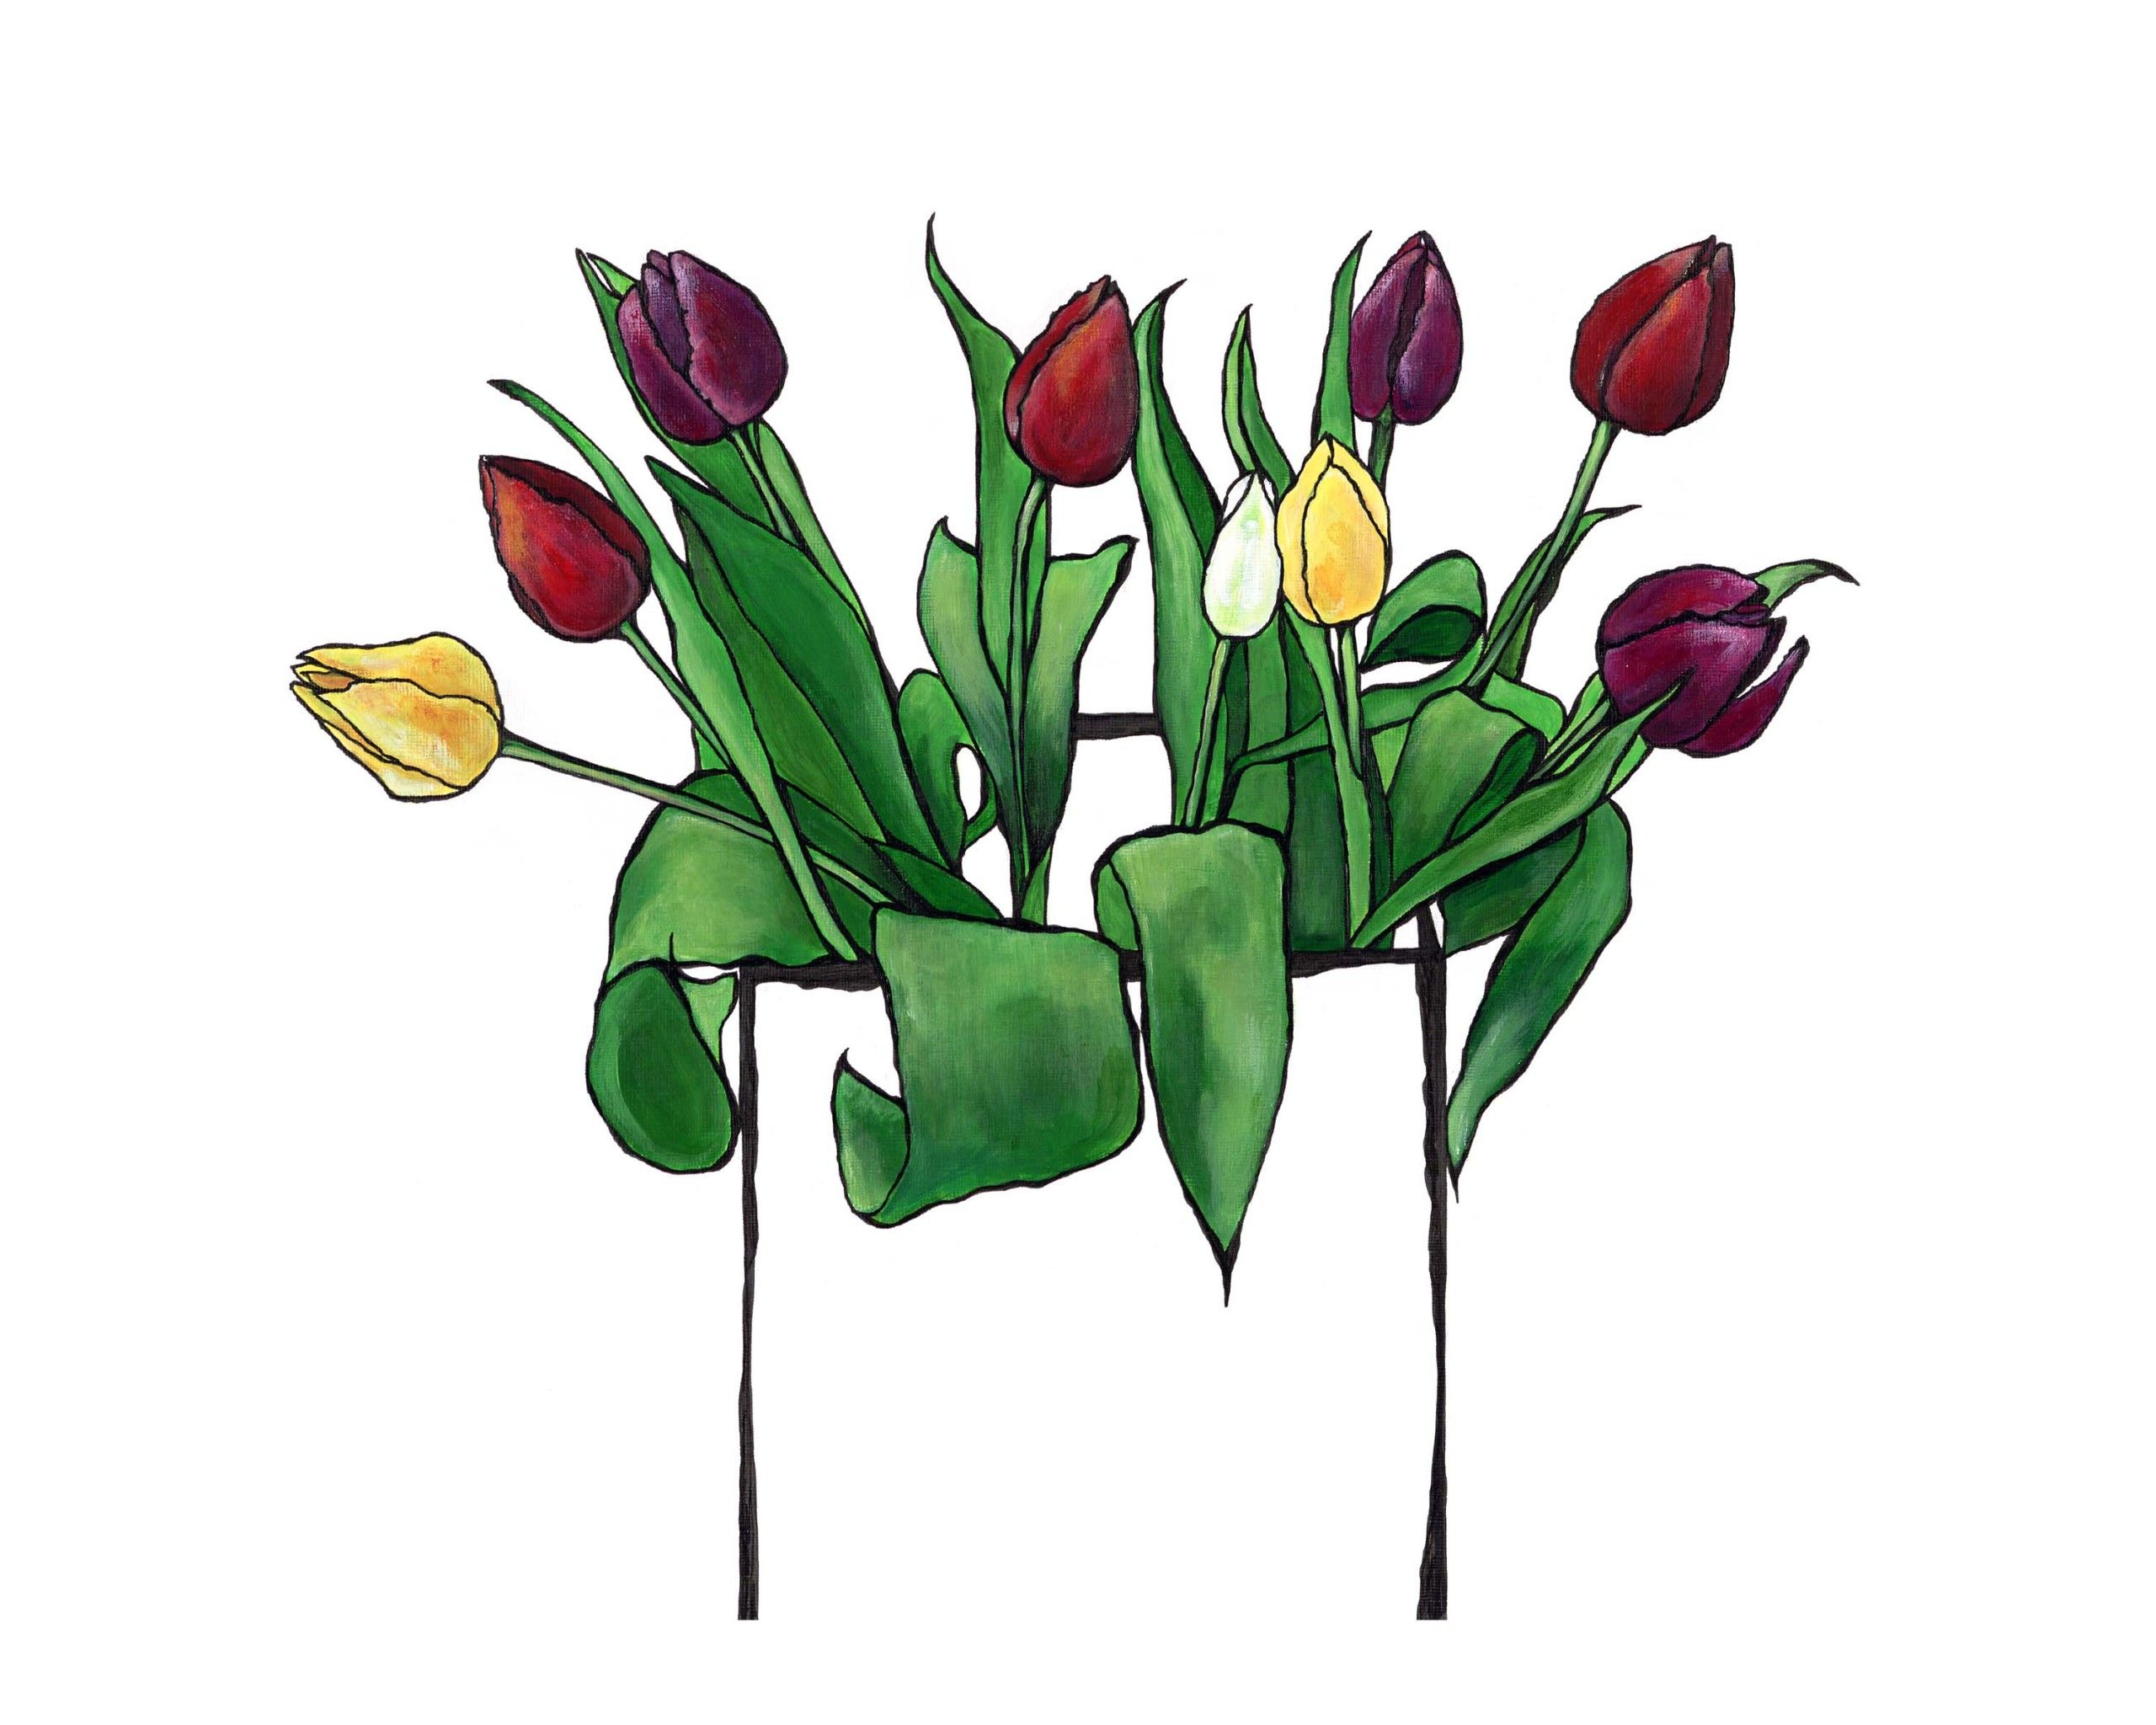 Mixed Tulips by Lucy Routh